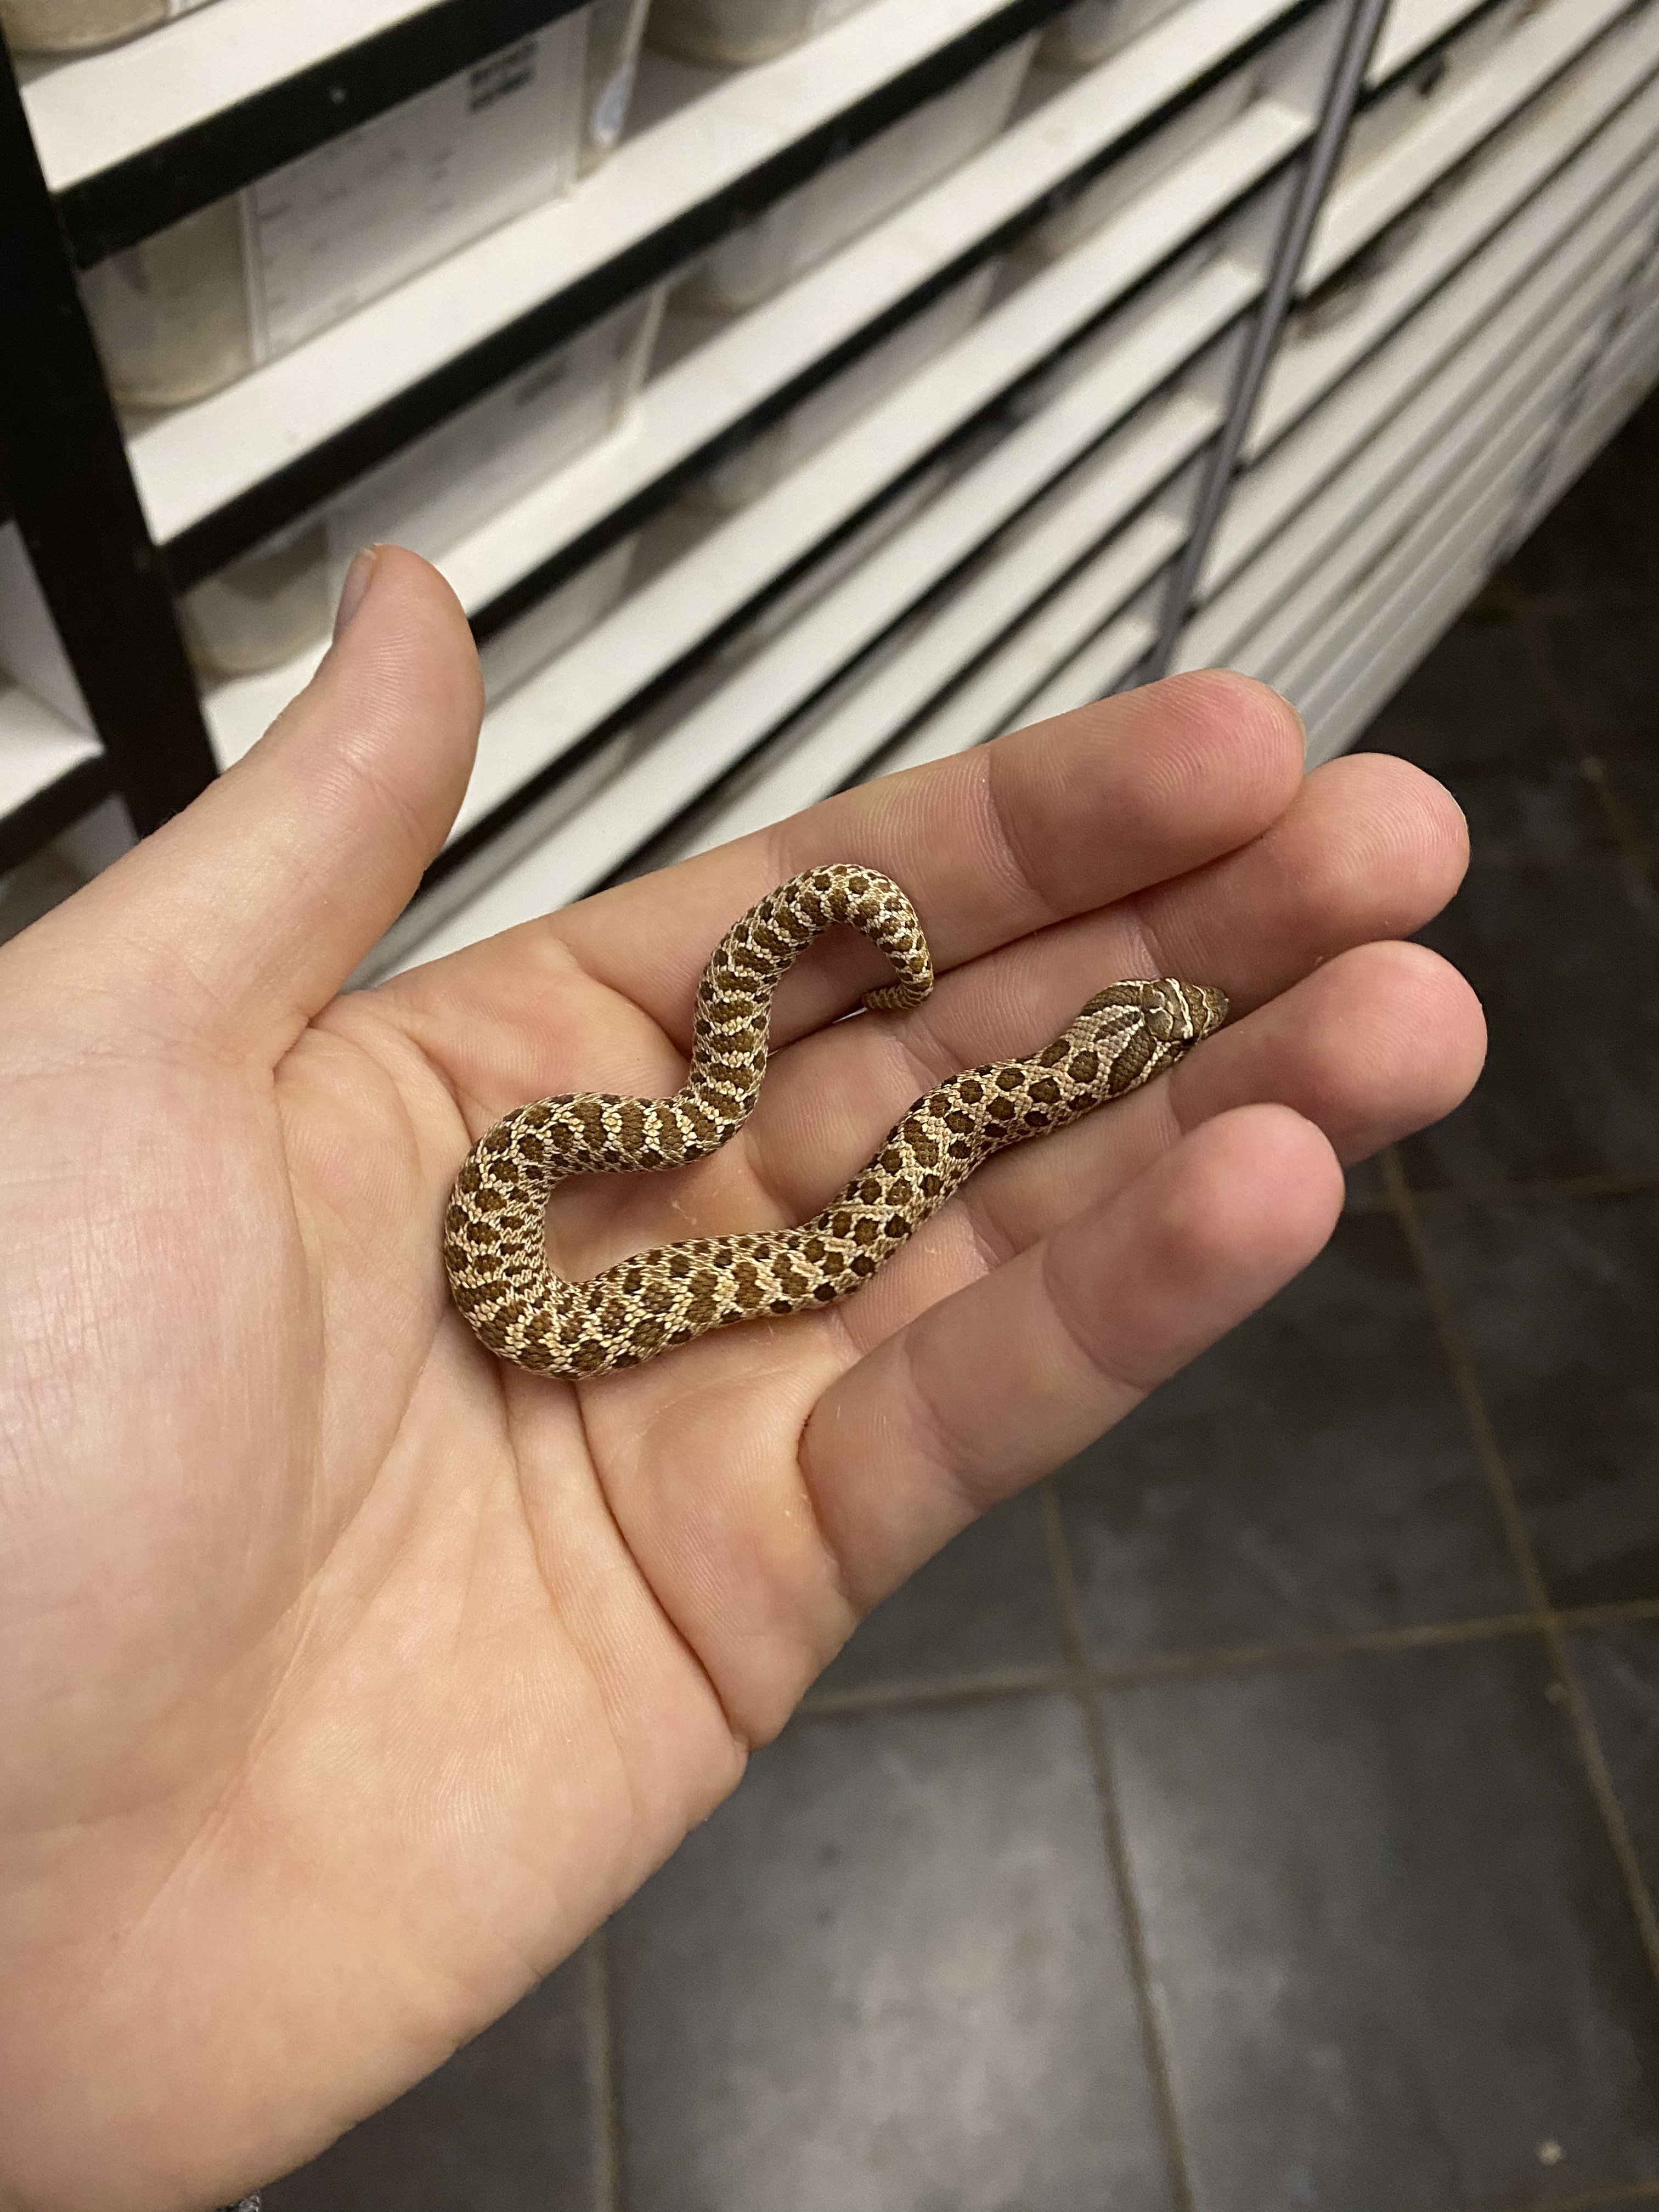 Normal Western Hognose by Reptiles for Centuries